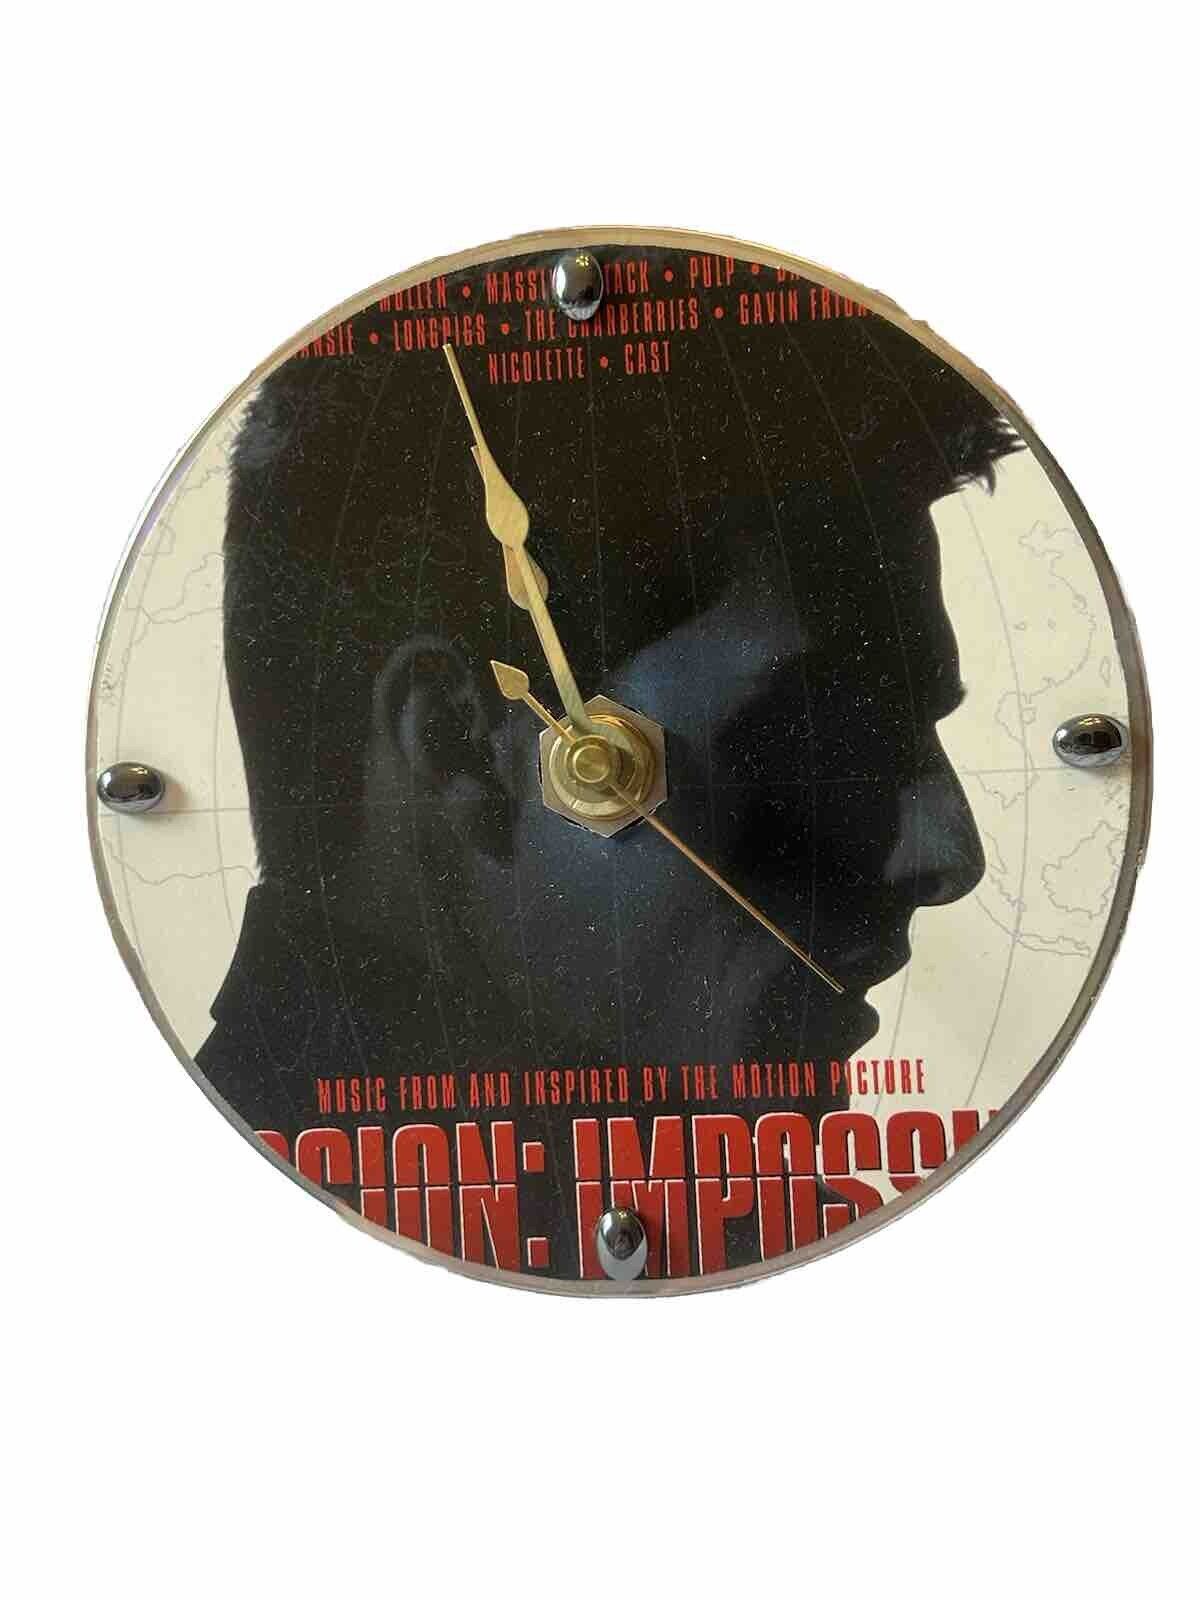 Custom Made Mission Impossible DVD Clock.  5x5 Requires (1) AA Battery.